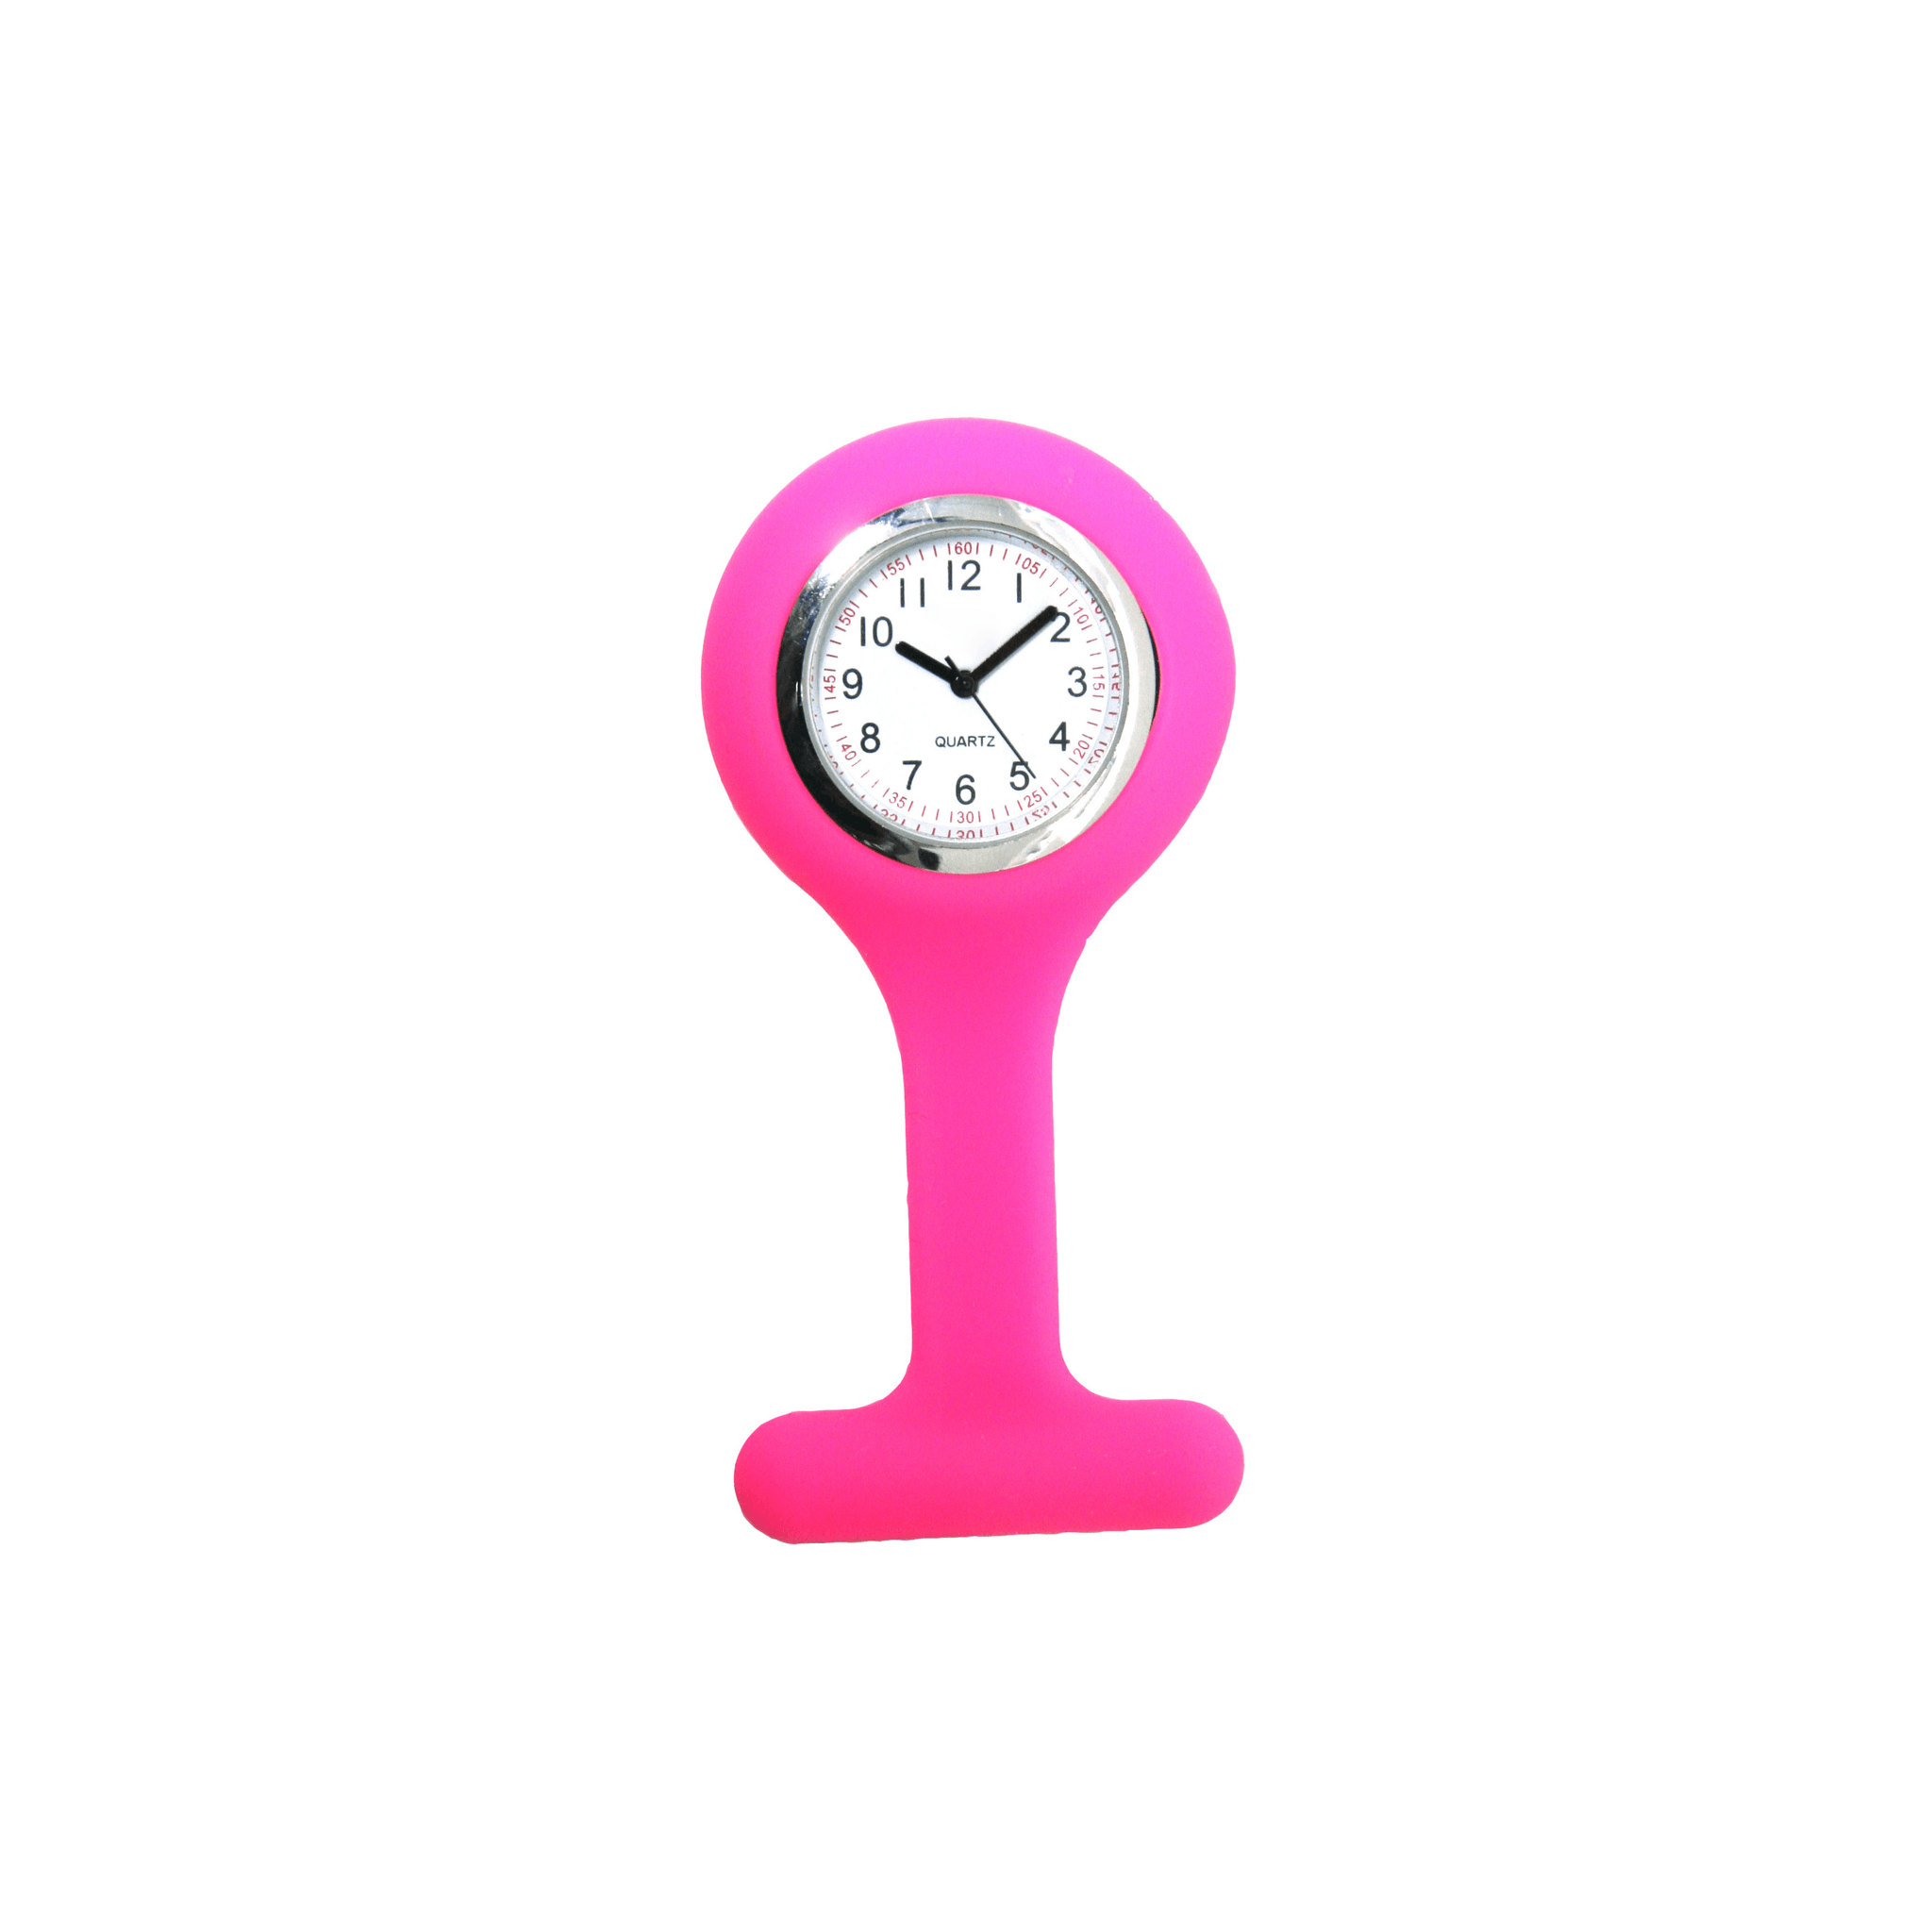 Nurse's Fob Watch- Silicone, Pink